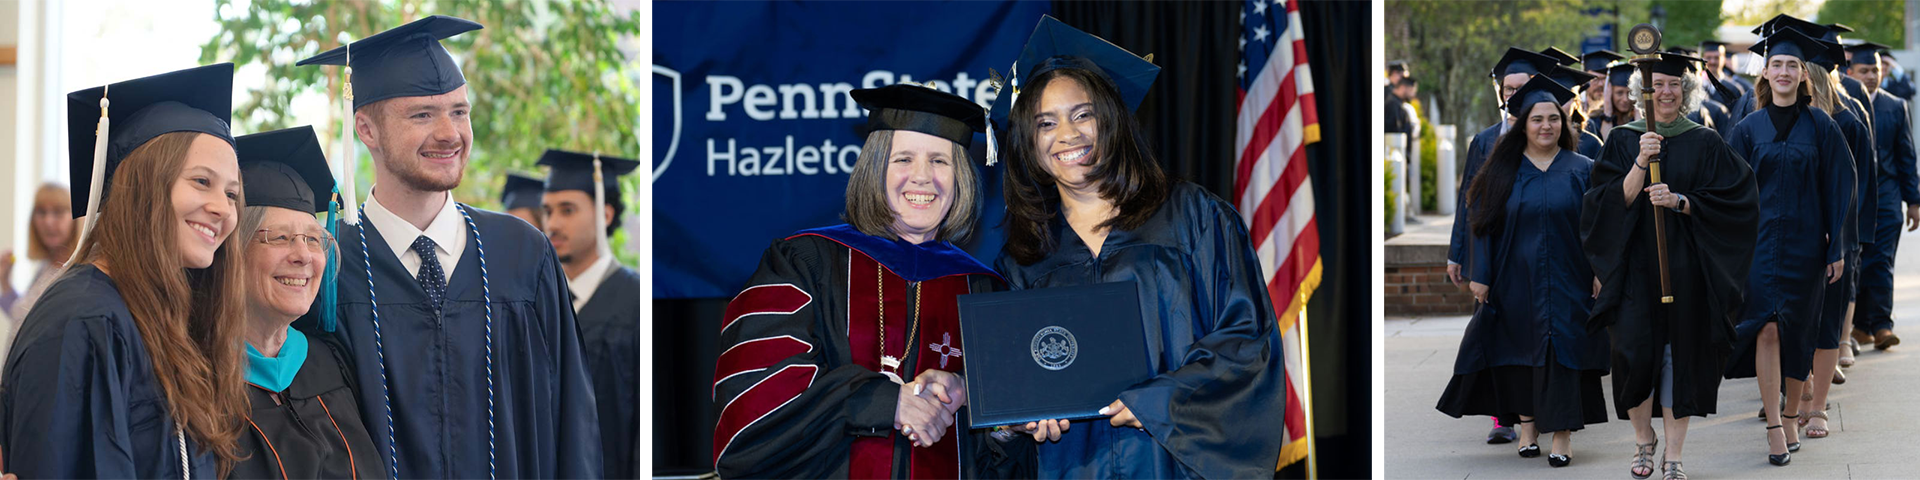 Three photos of graduation scenes. Female professor, female graduate and male graduate each wearing graduation regalia. A female administrator shaking hands with a female graduate and handing her a diploma. A processional of graduates in caps and gowns walking on a sidewalk being led by a female administrator carrying a staff with medallion.